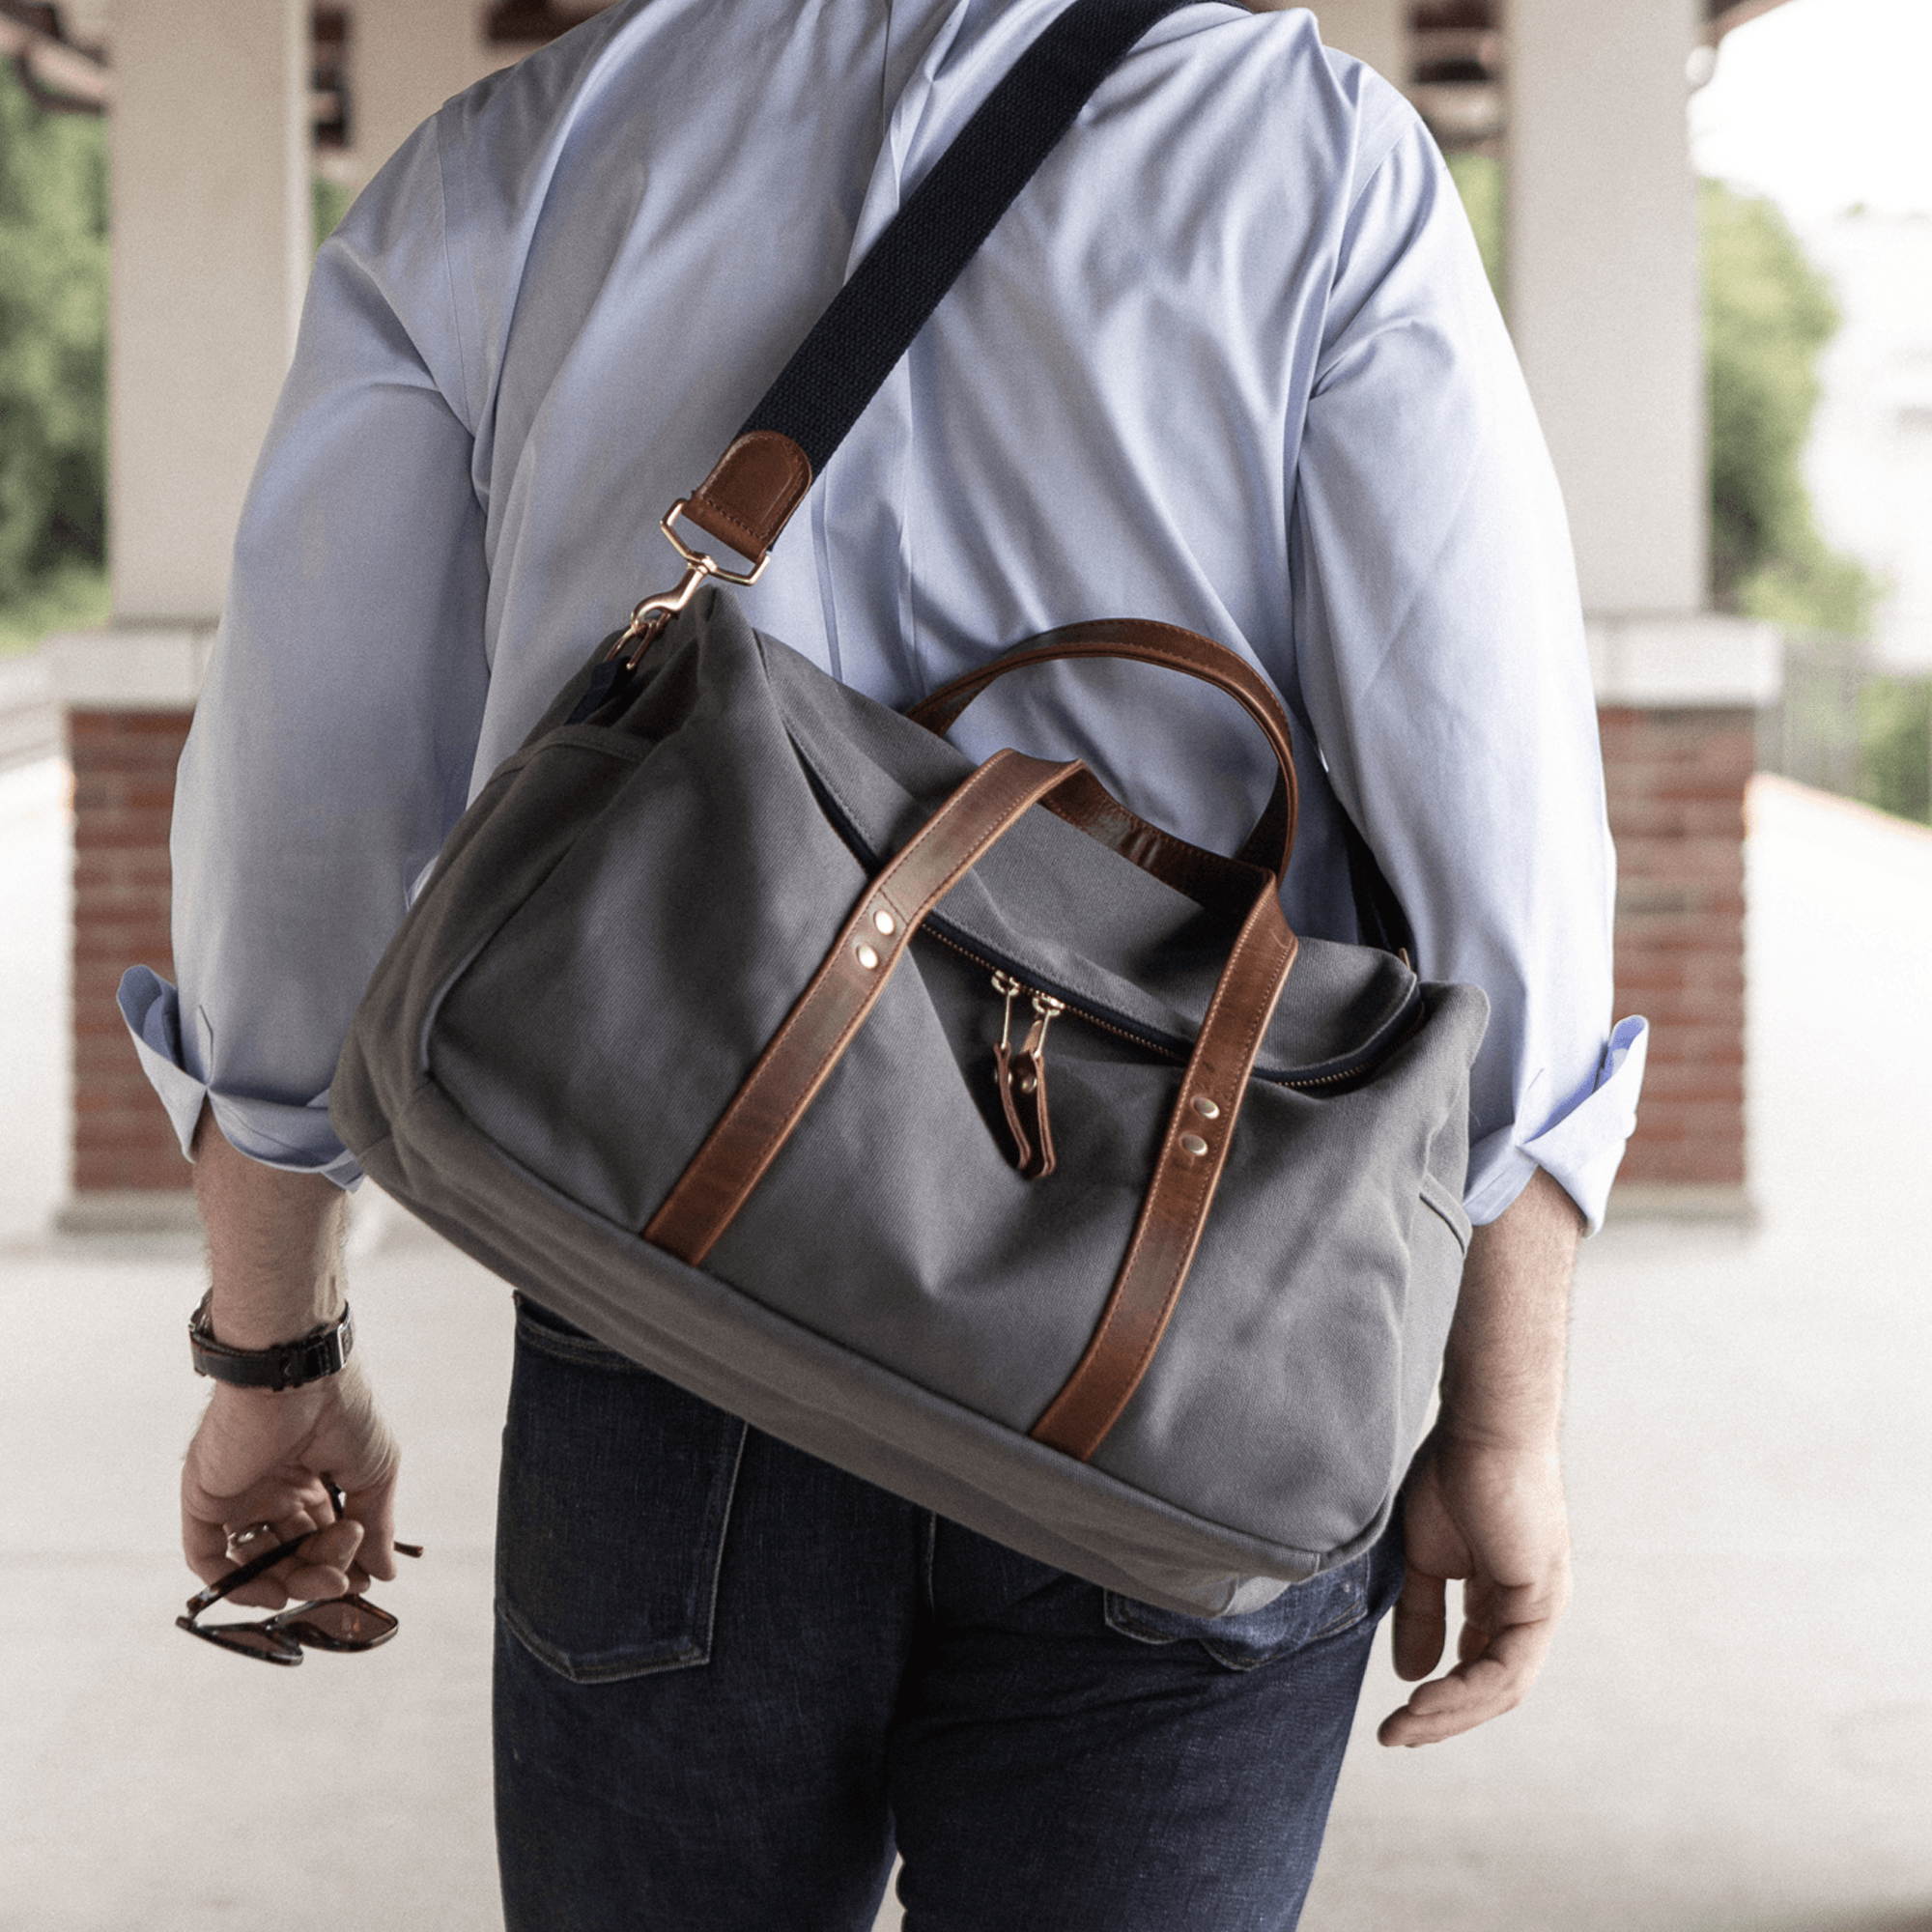 Medium Canvas and Leather Duffel Bag - Charcoal Grey/Whiskey Brown